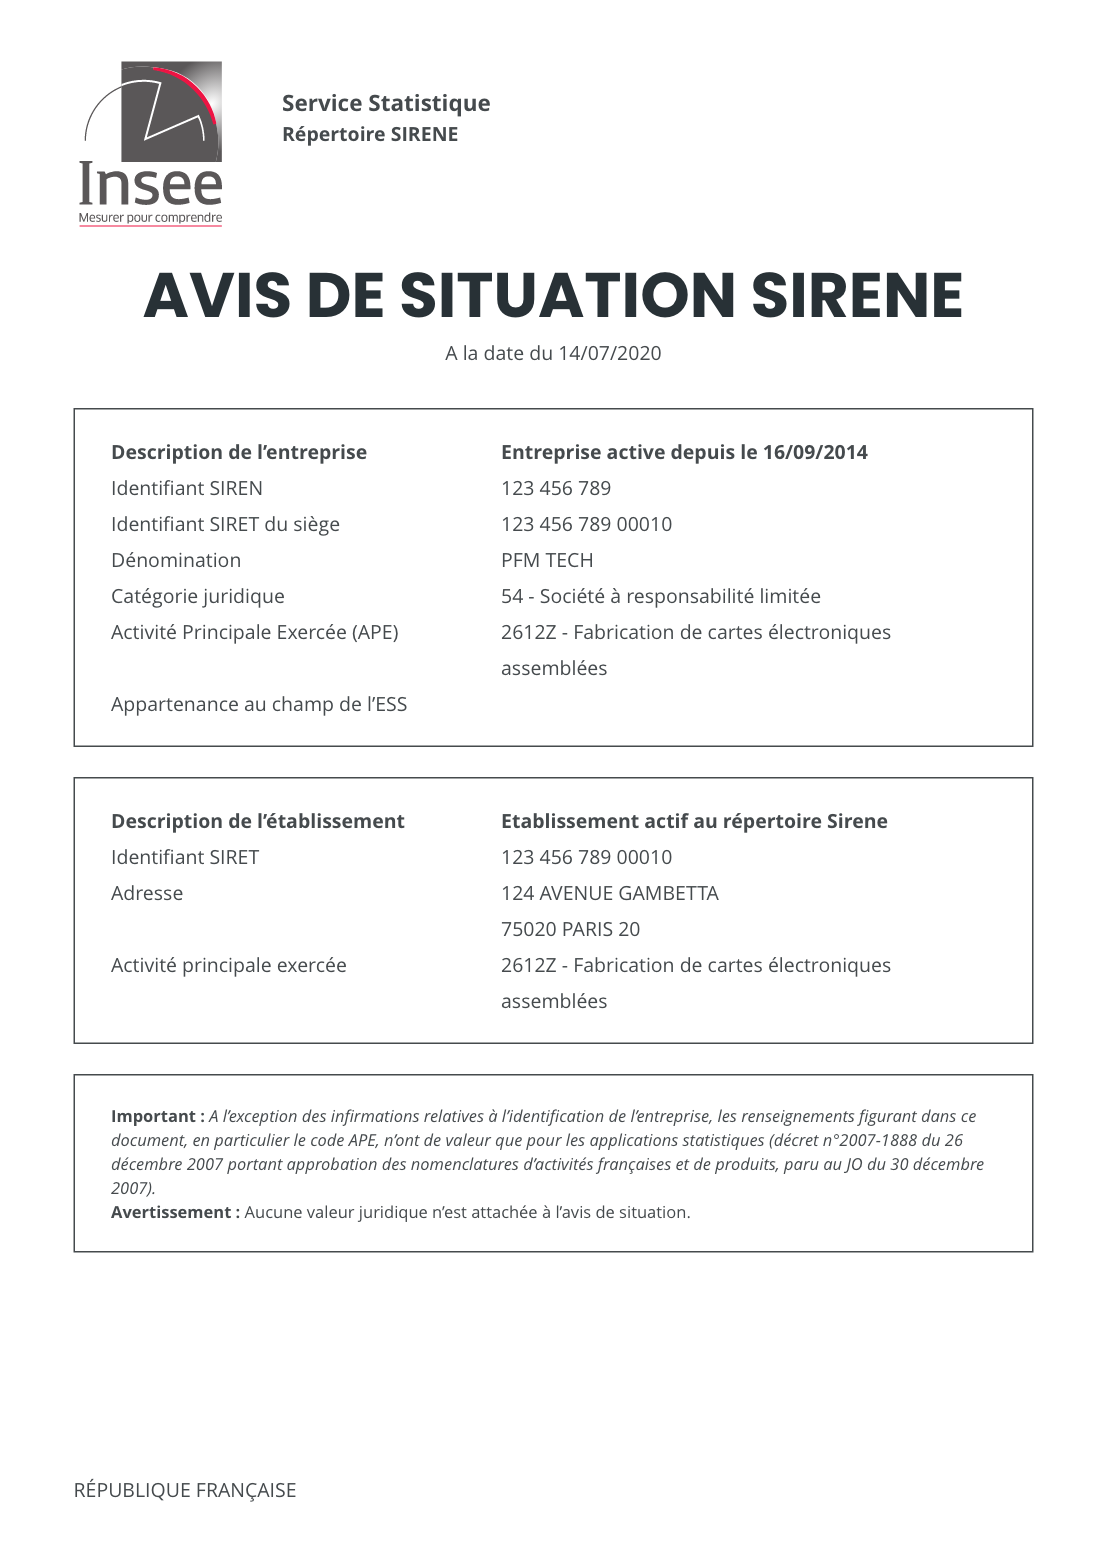 /build//img/services/document-situation-sirene.png